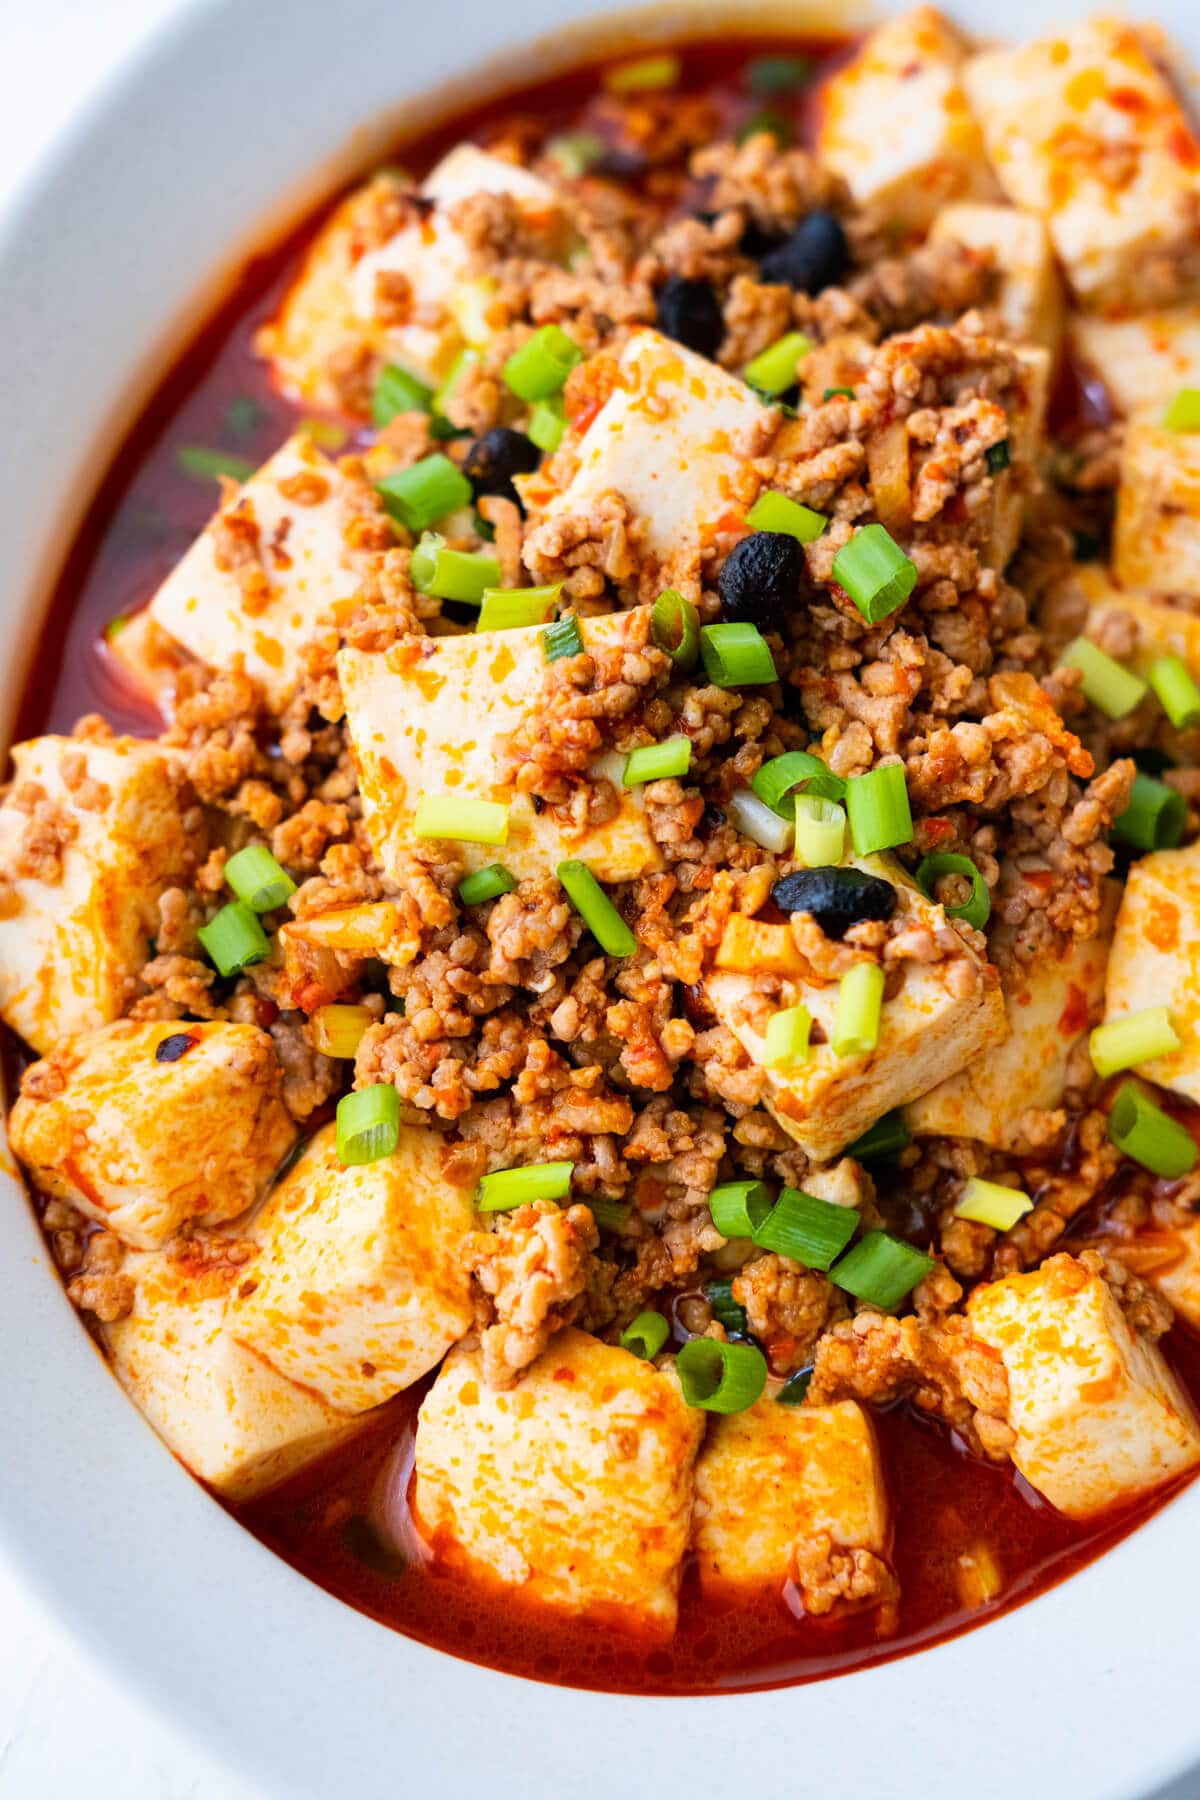 Mapo tofu with cut up tofu and minced meat in a bowl.